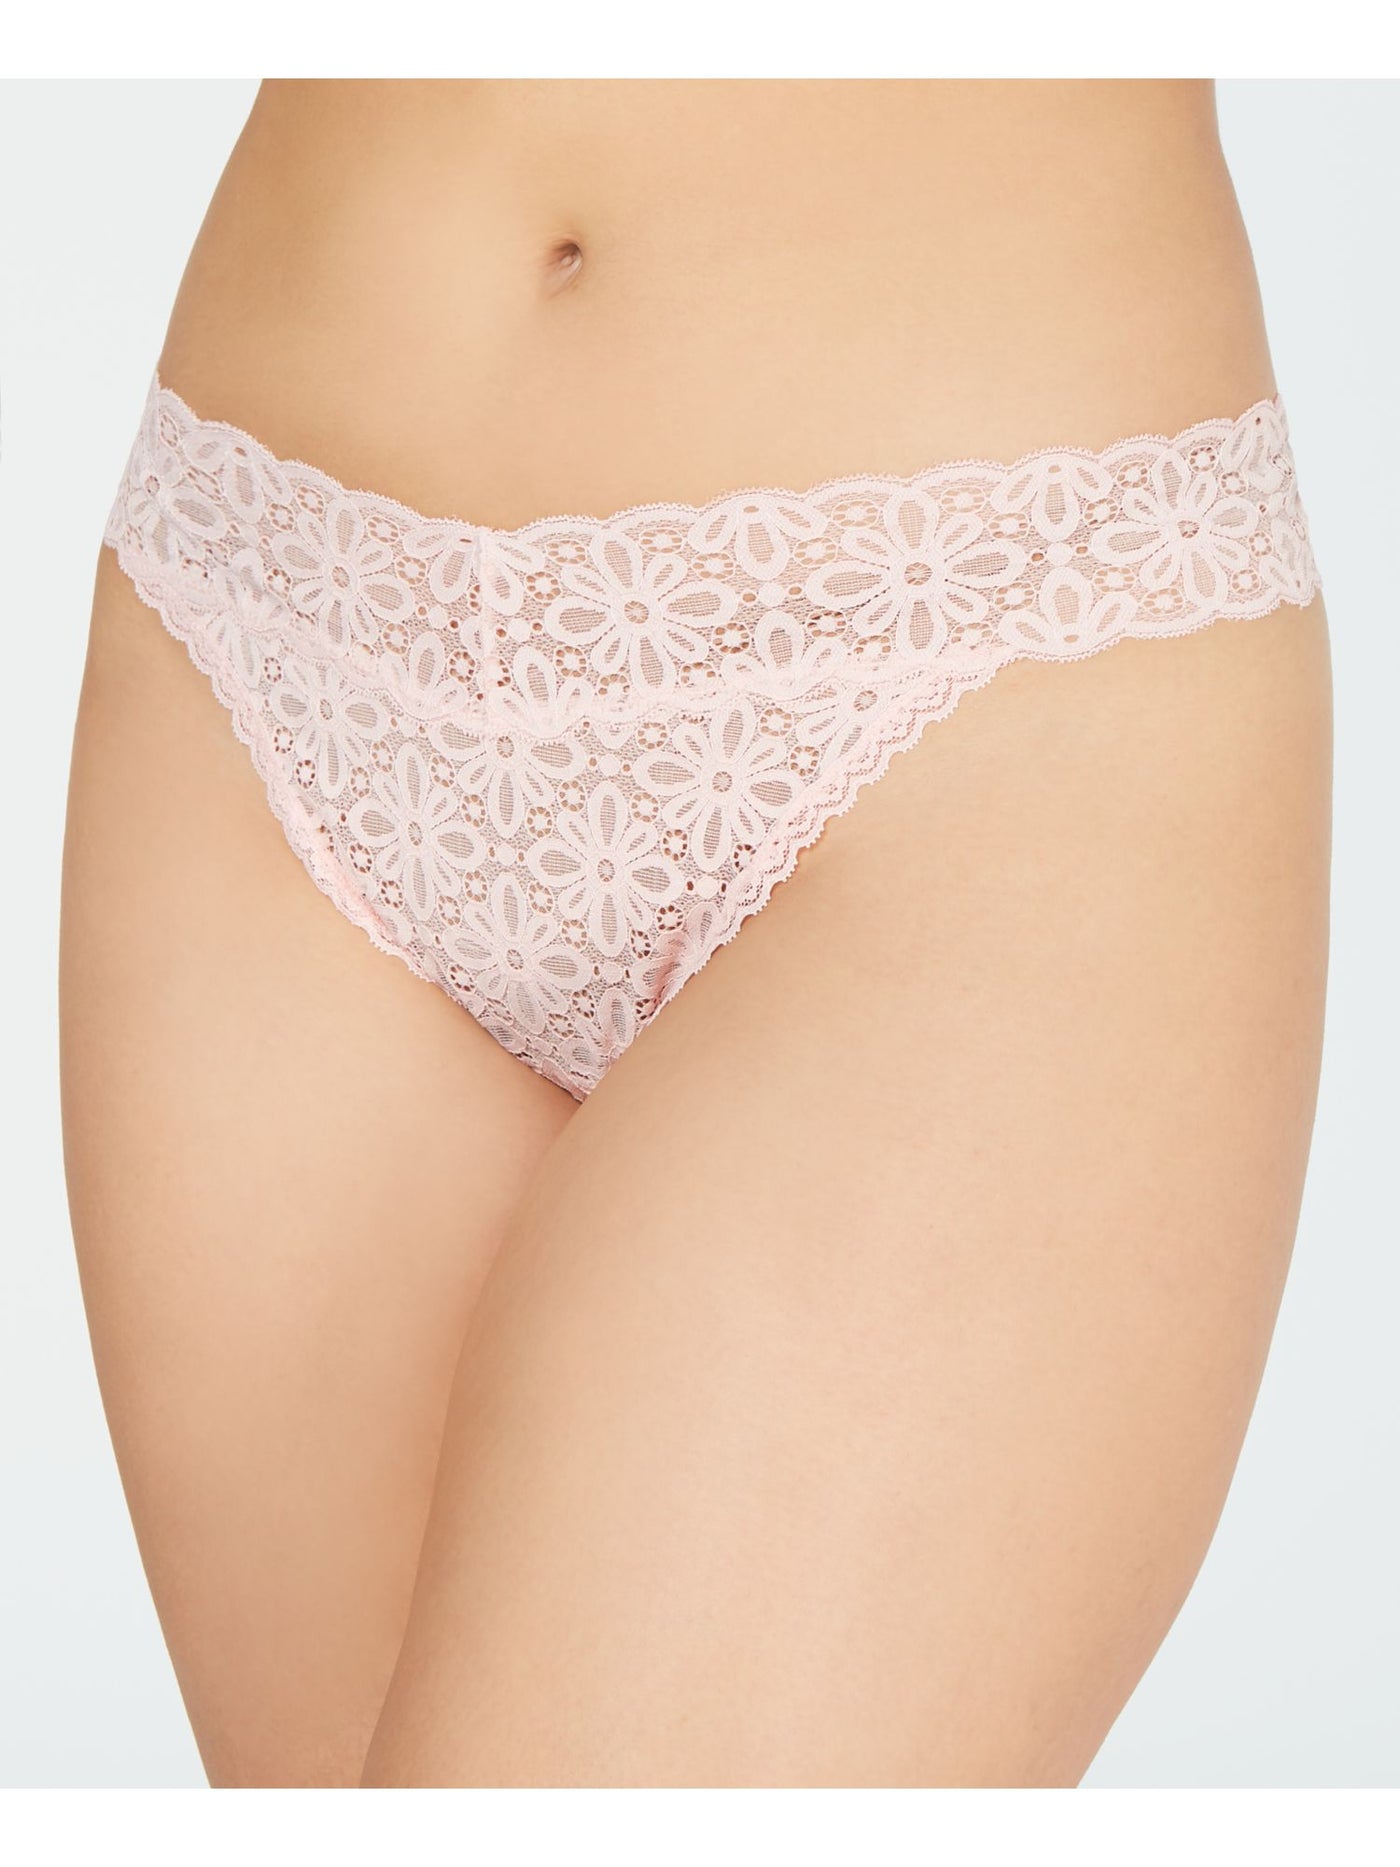 JENNI Intimates Pink Lace Solid Everyday Thong Plus Size: ONE SIZE